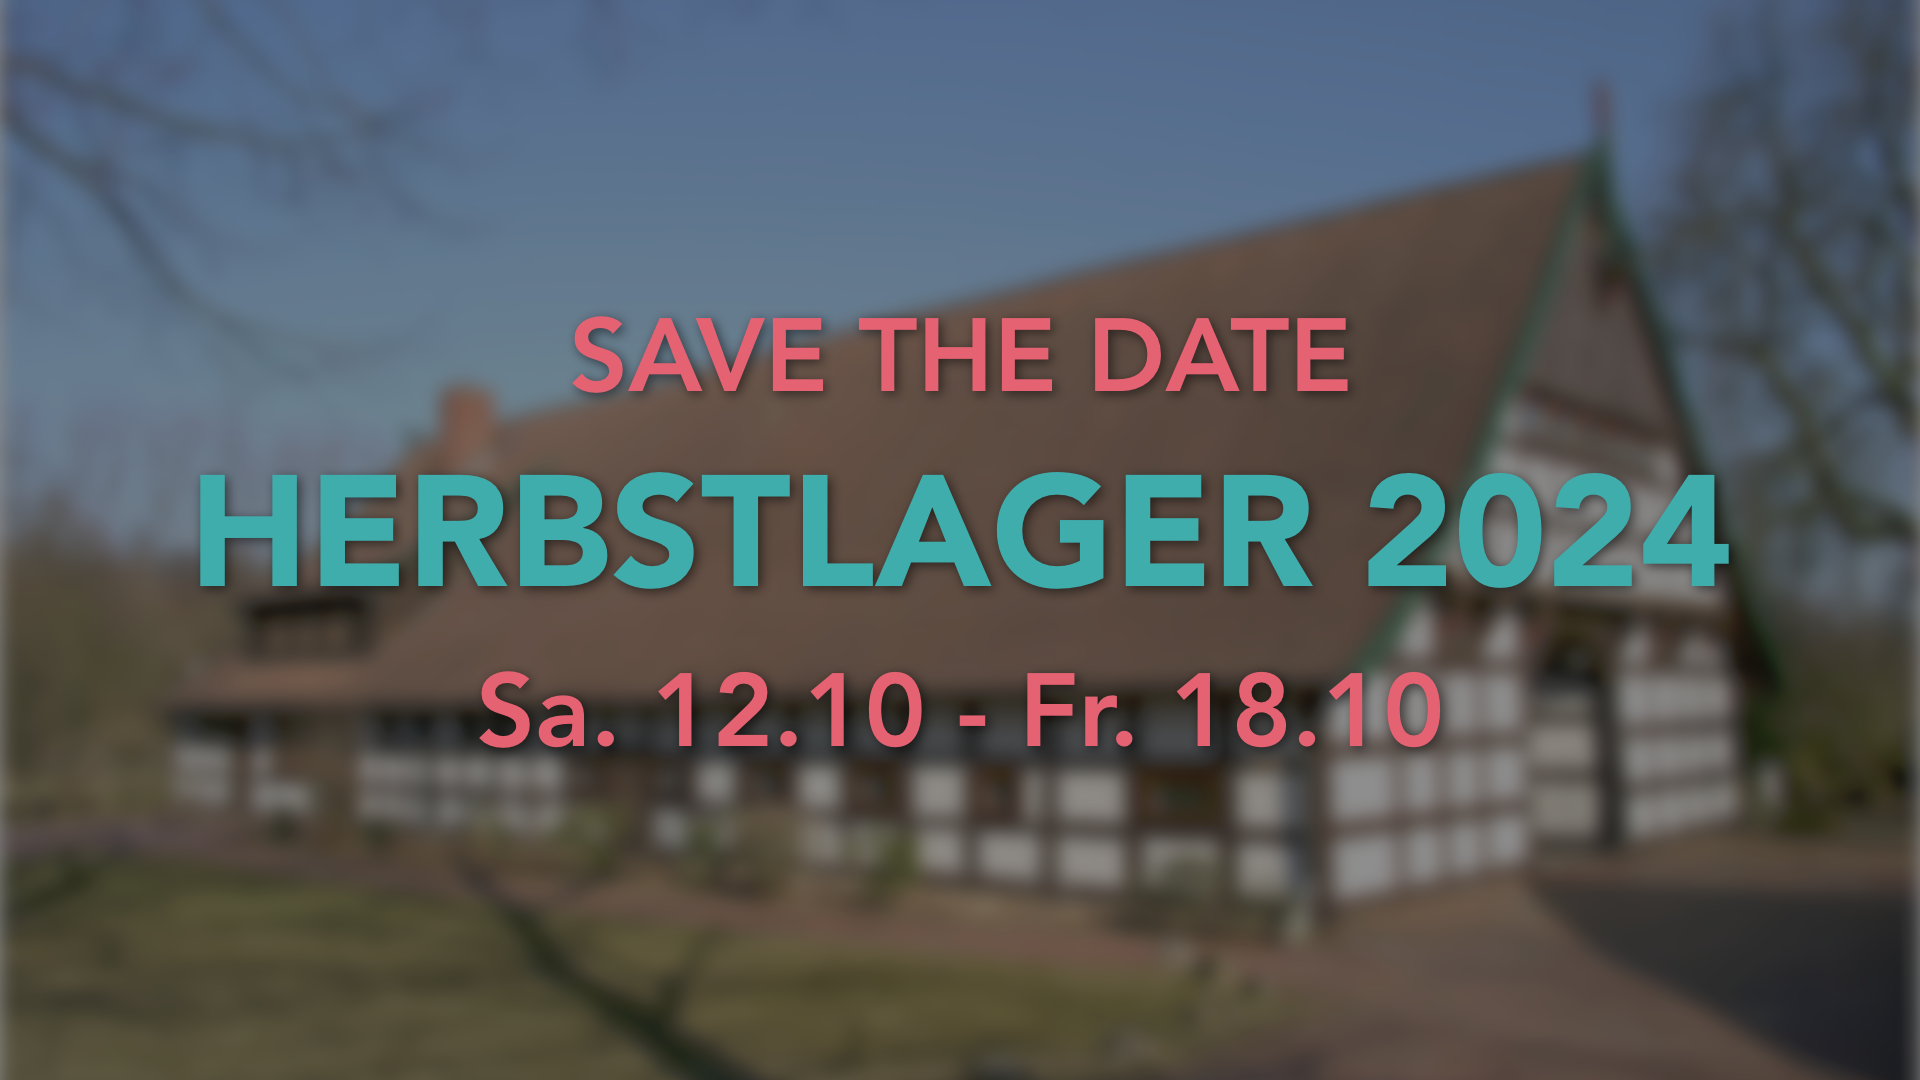 Save the Date: Herbstlager 2024